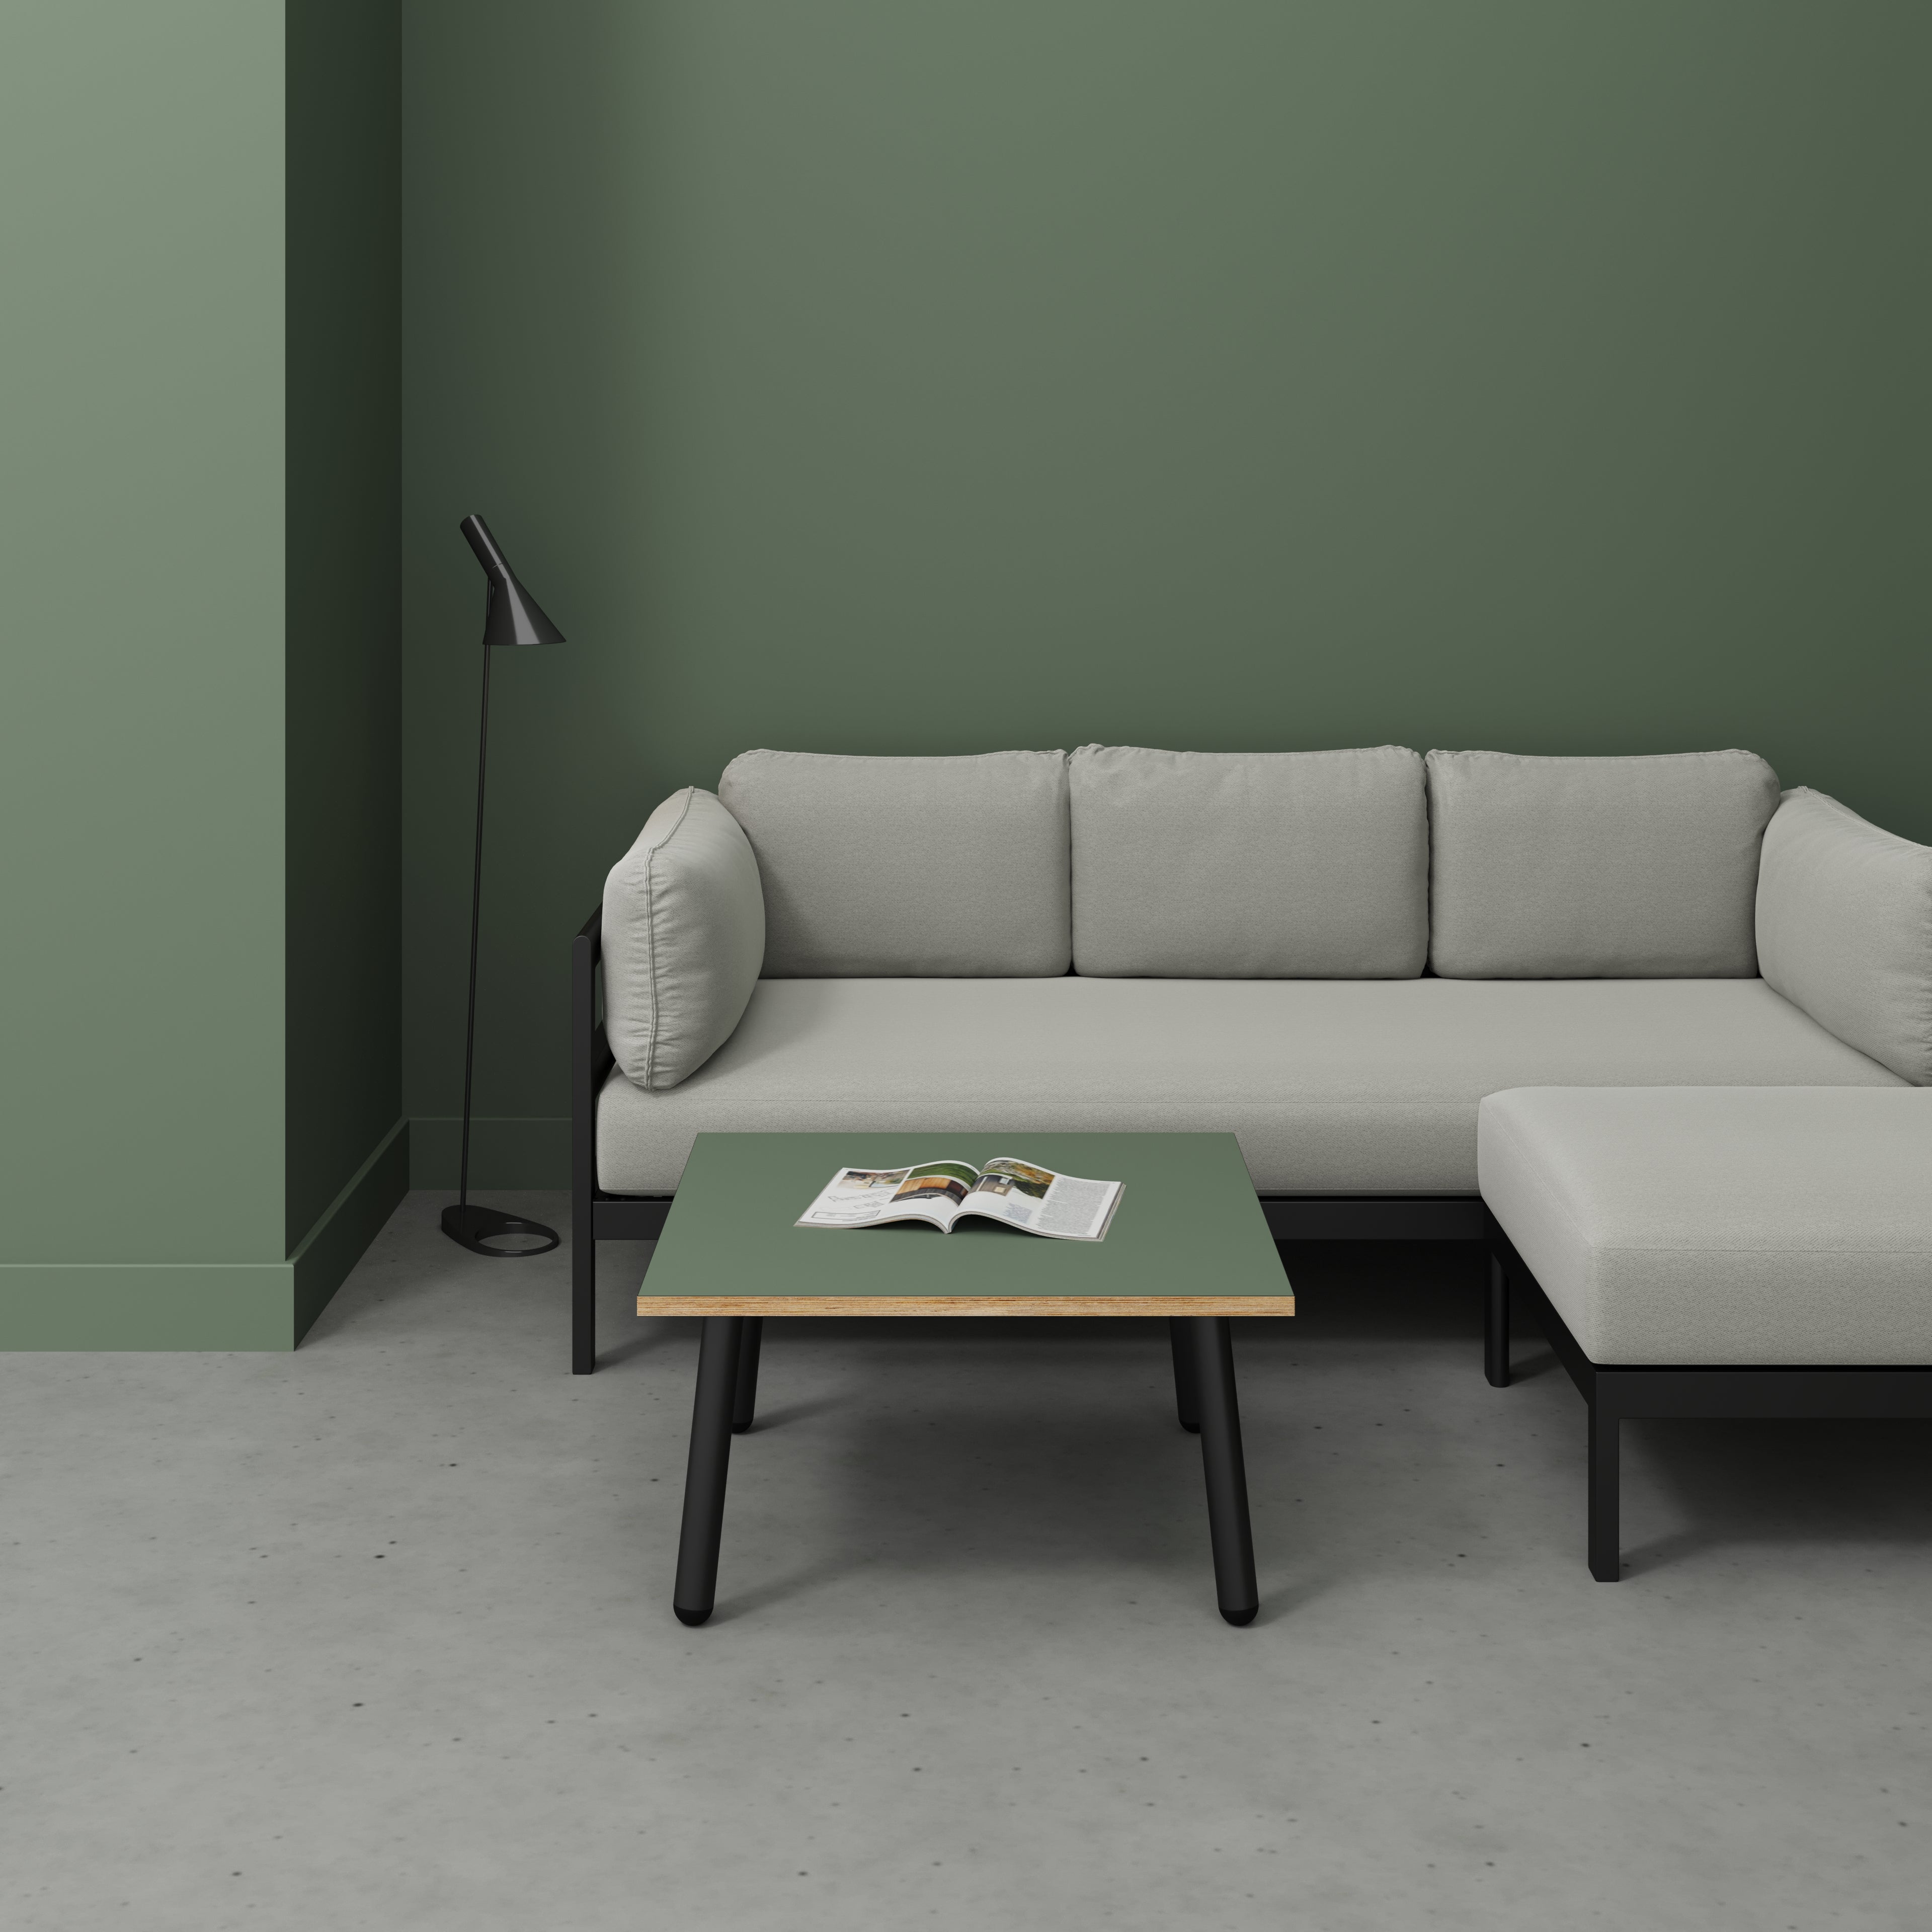 Coffee Table with Black Round Single Pin Legs - Formica Green Slate - 800(w) x 800(d) x 425(h)